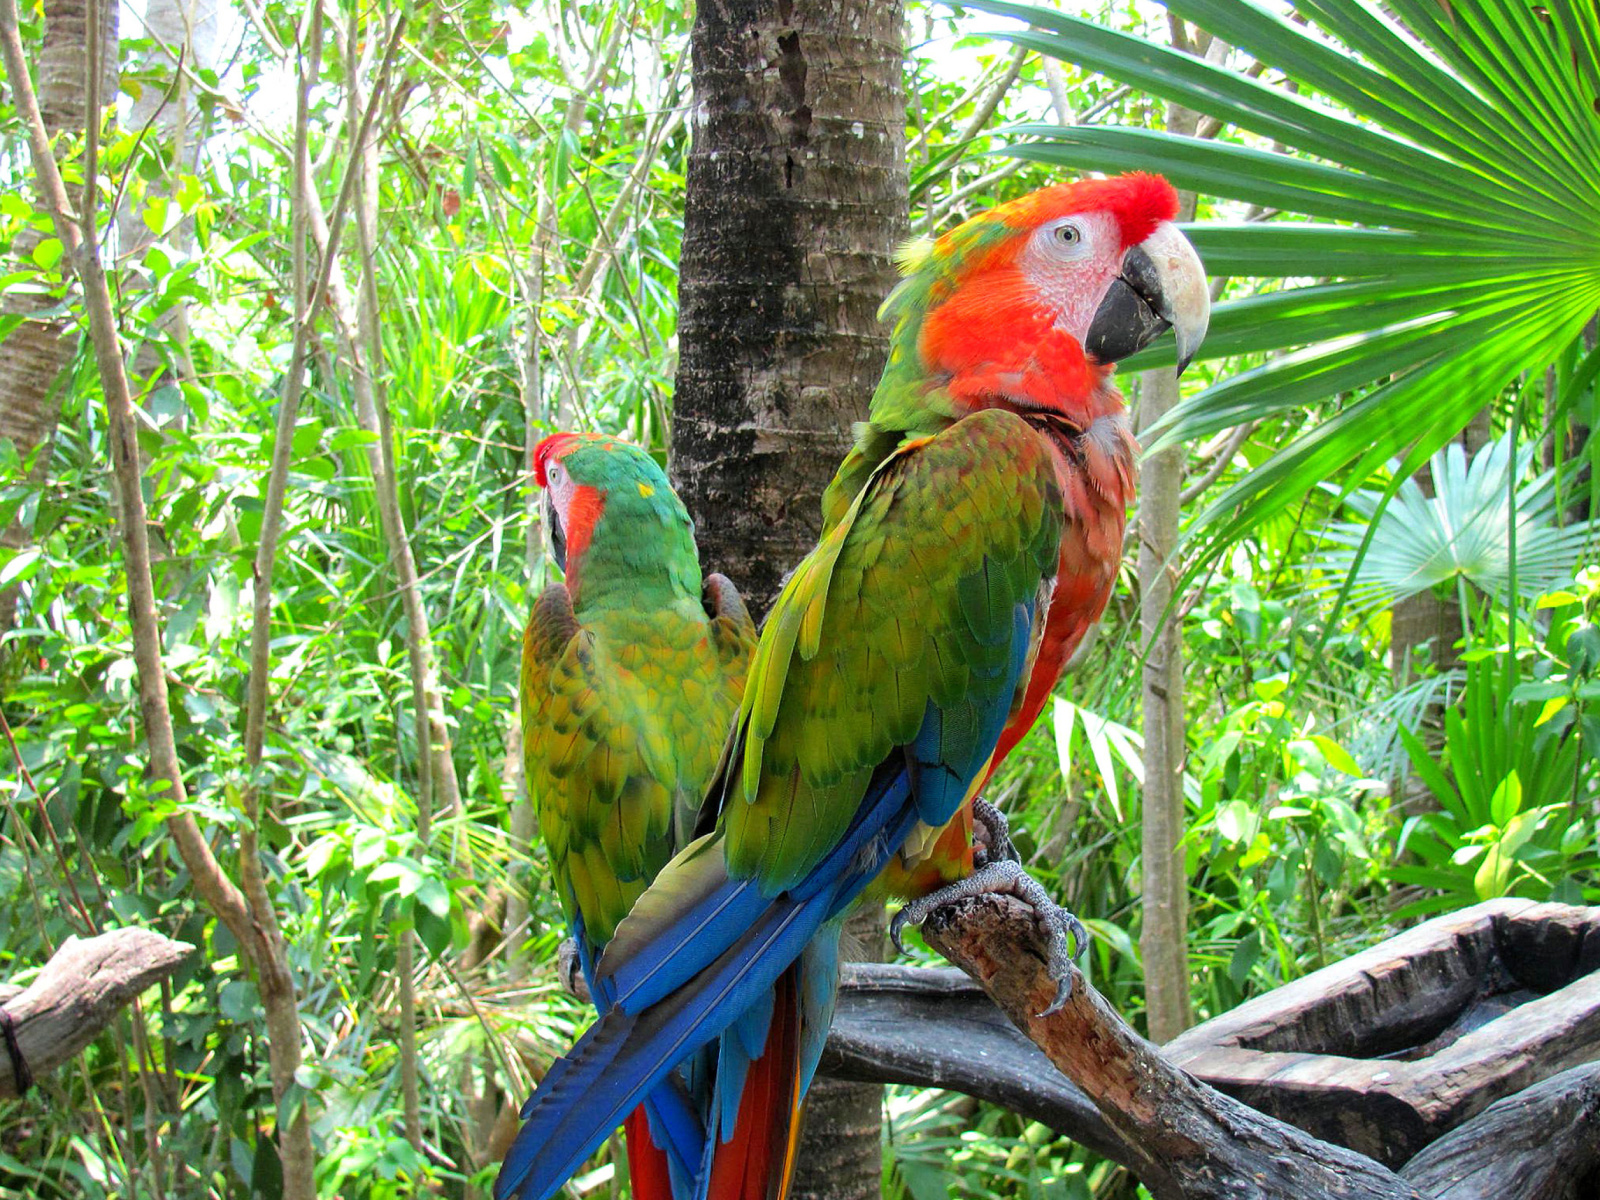 Macaw parrot Amazon forest screenshot #1 1600x1200